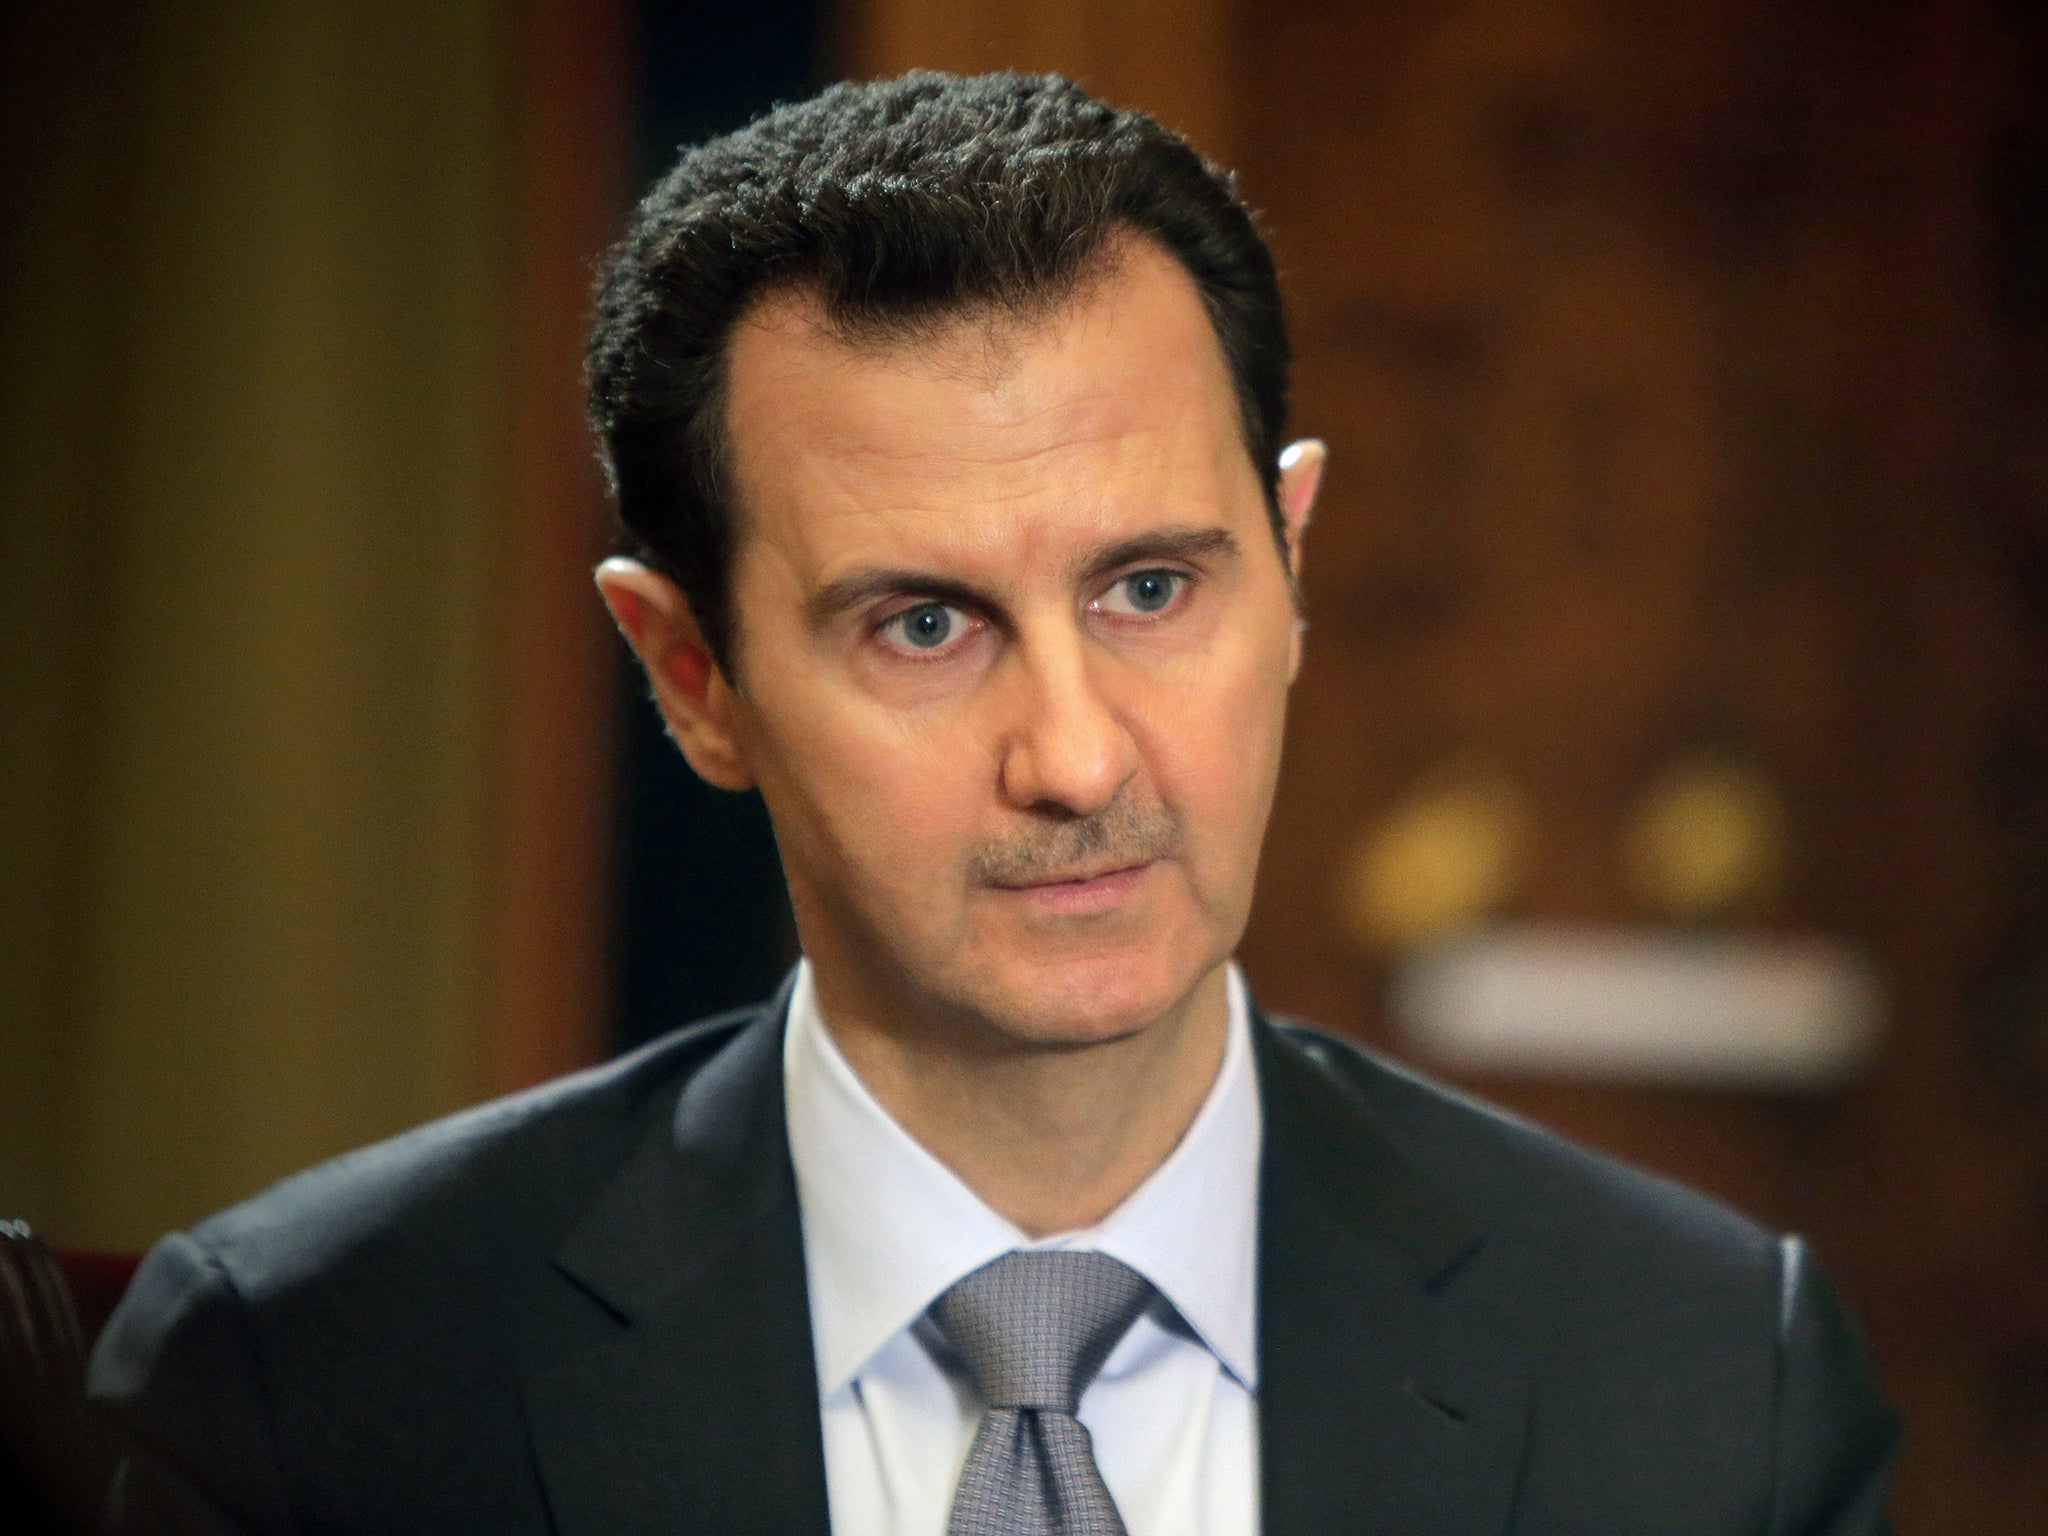 Bashar al-Assad remains in power in Syria despite more than four years of bloody civil war